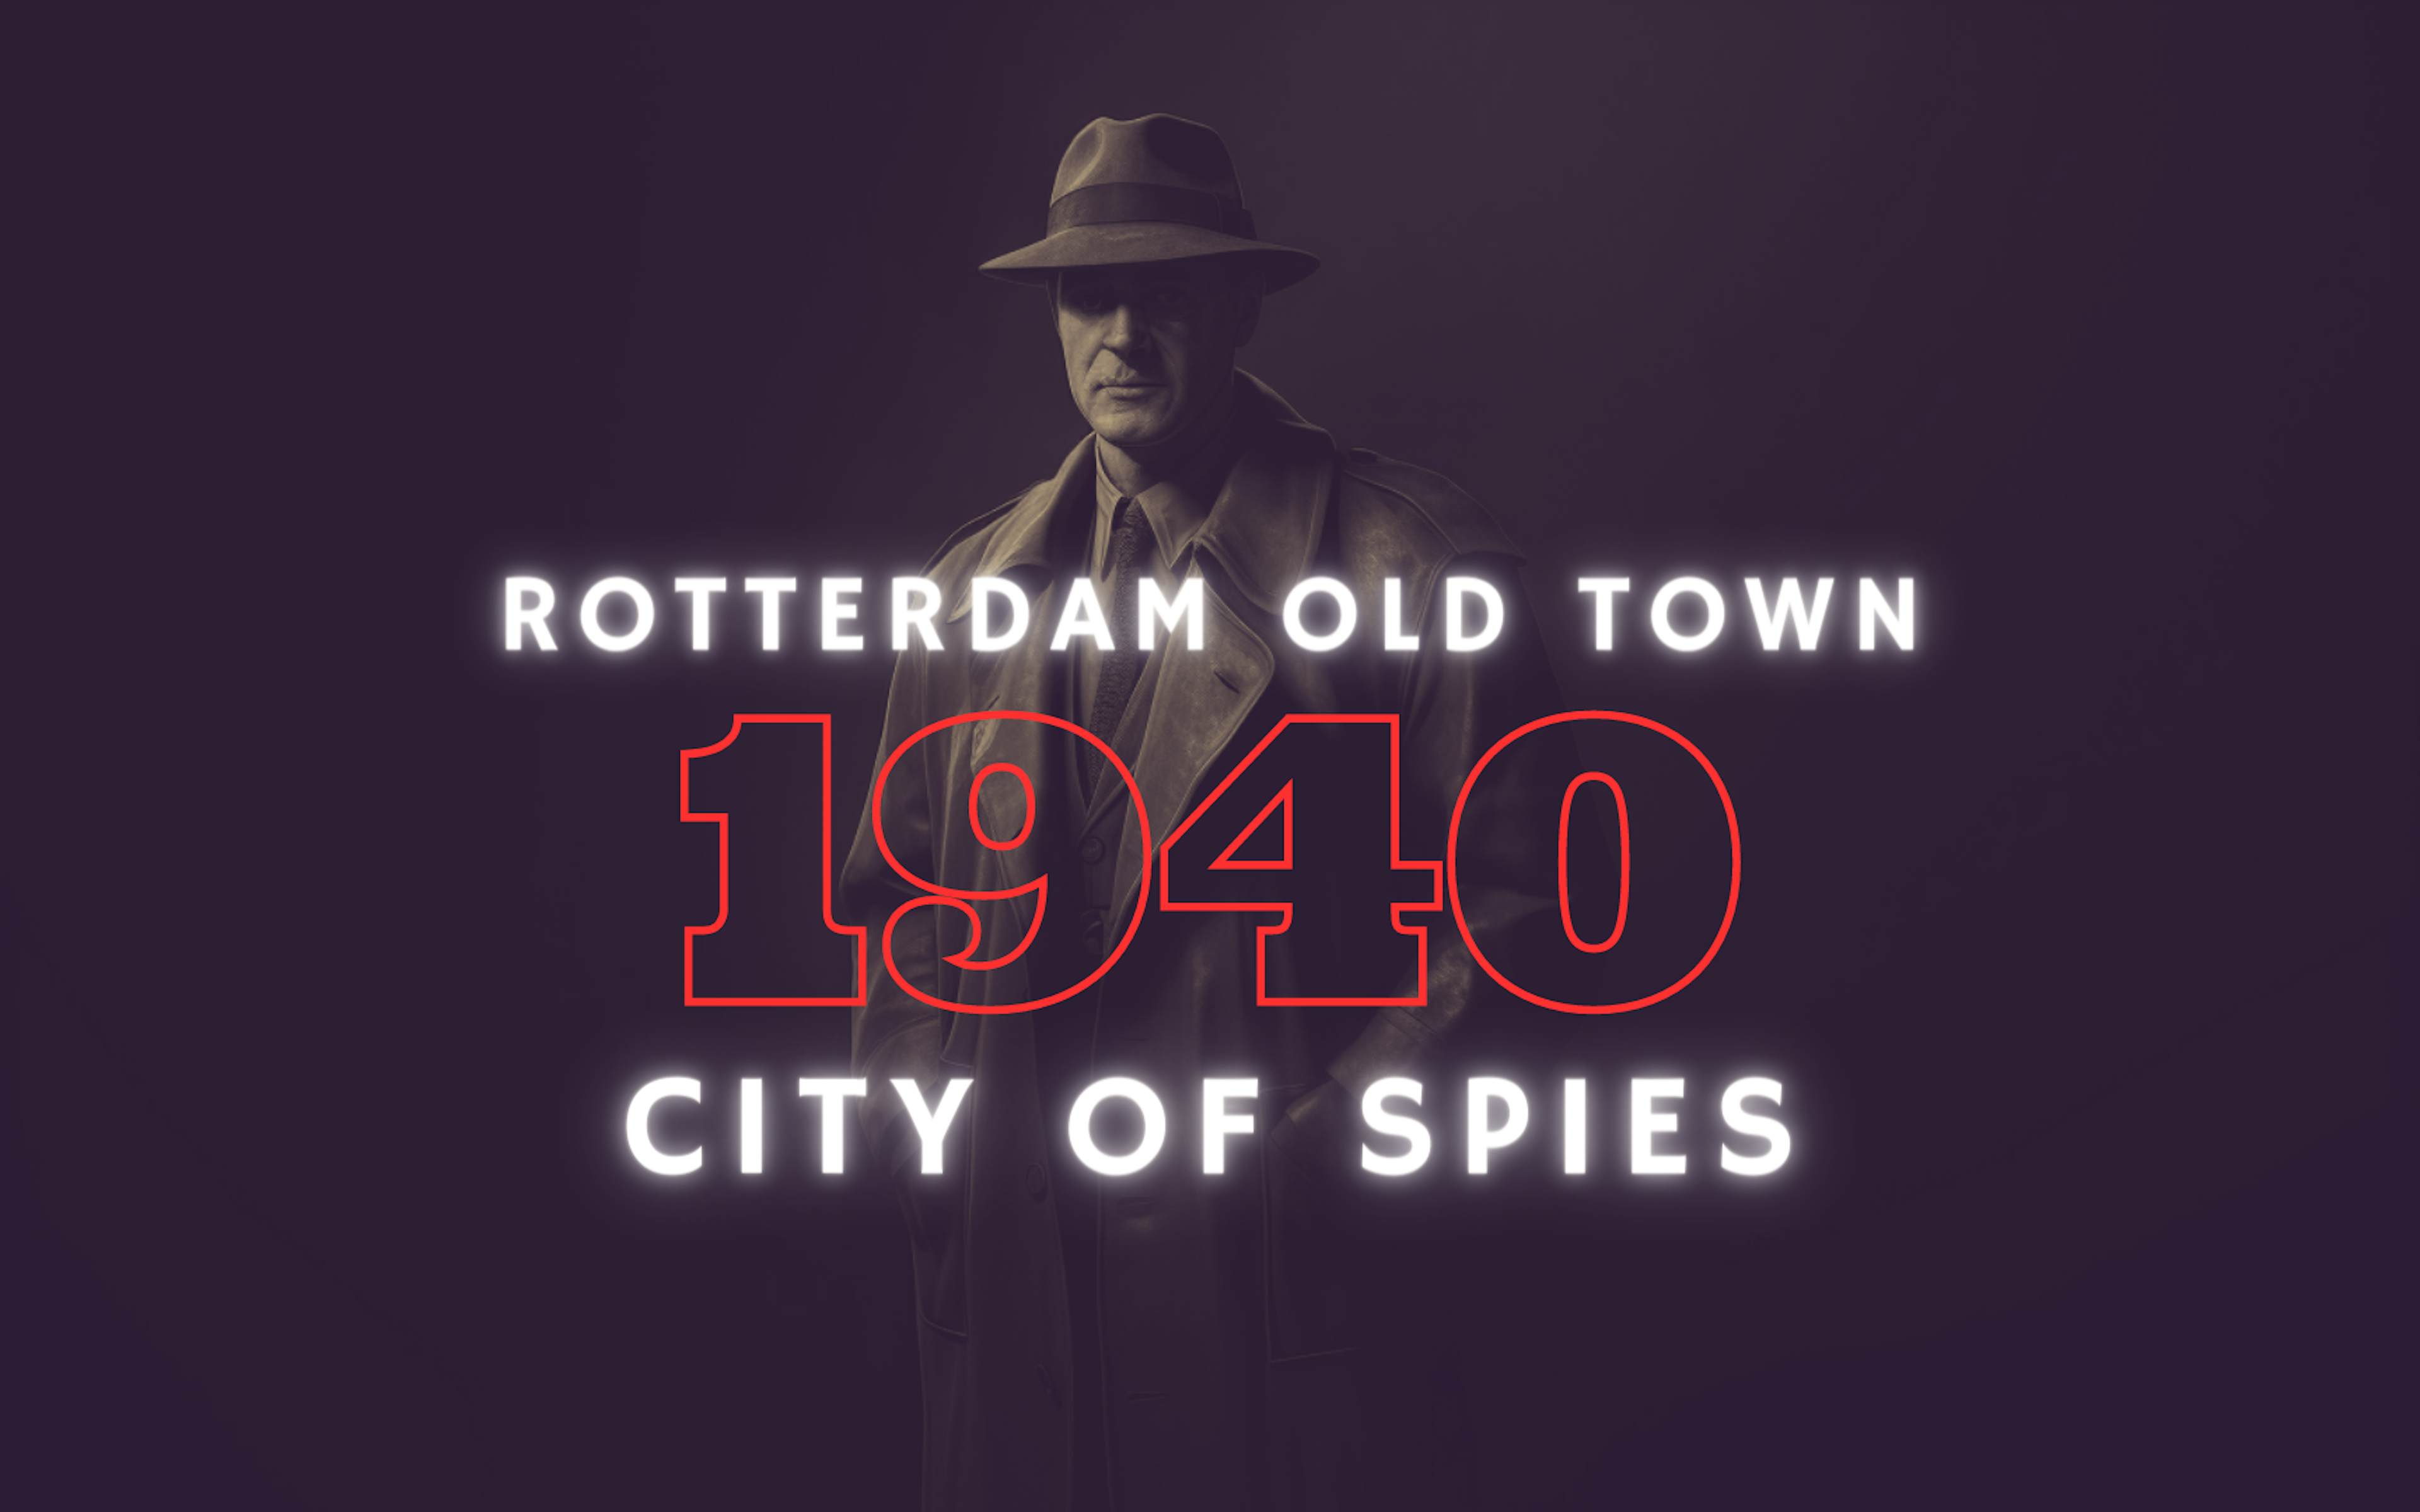 Rotterdam Old Town: City of Spies